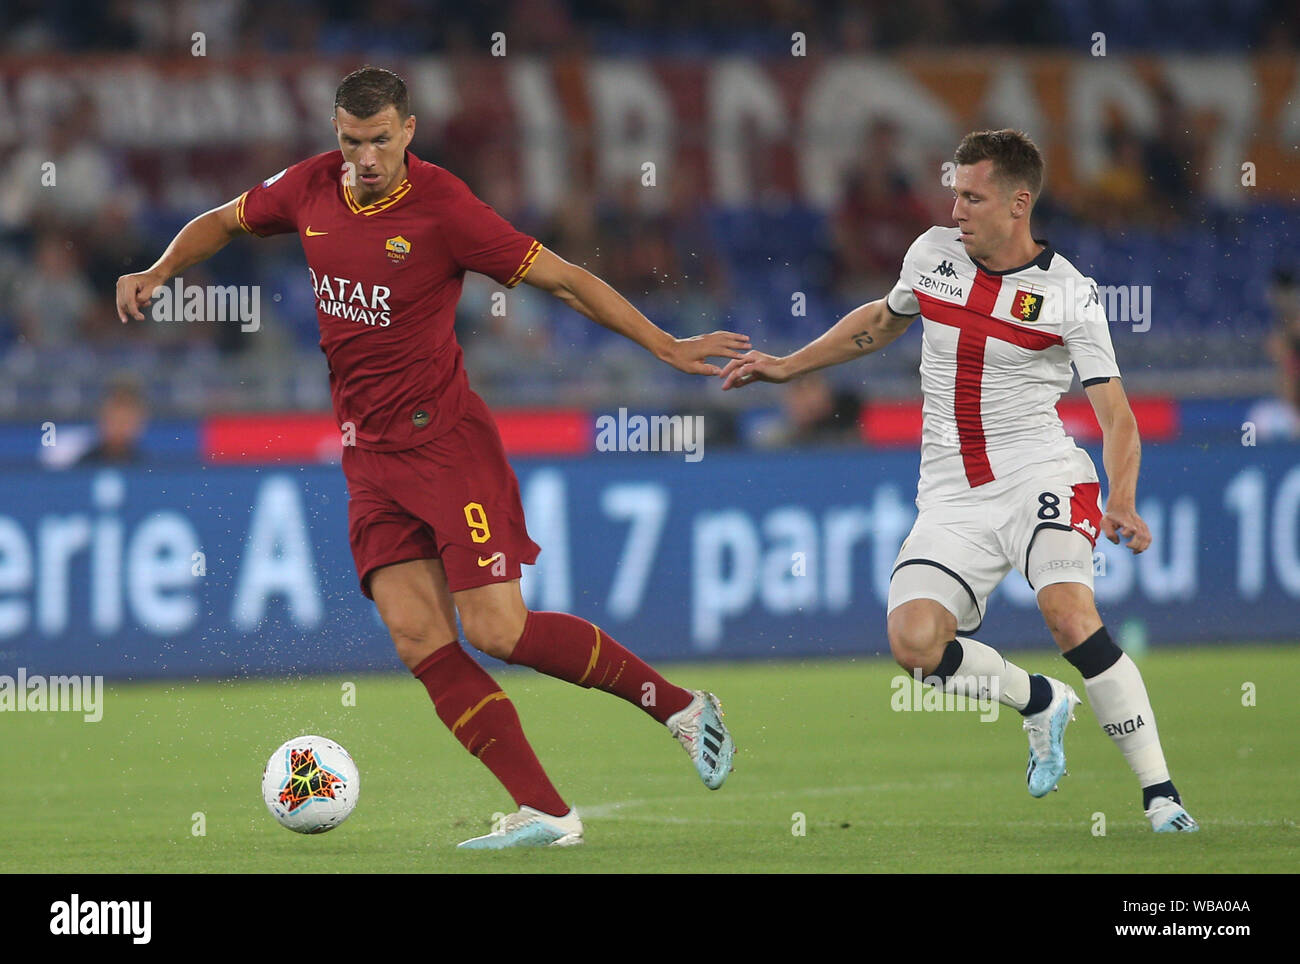 Rome, Italy. 26th Aug, 2019. Rome, Italy - August 25, 2019: Edin Dzeko (AS ROMA) AND L.Lerager (GENOA) in action during the Serie A soccer match between AS ROMA and GENOA FC, at Olympic Stadium in Rome. Credit: Independent Photo Agency/Alamy Live News Stock Photo